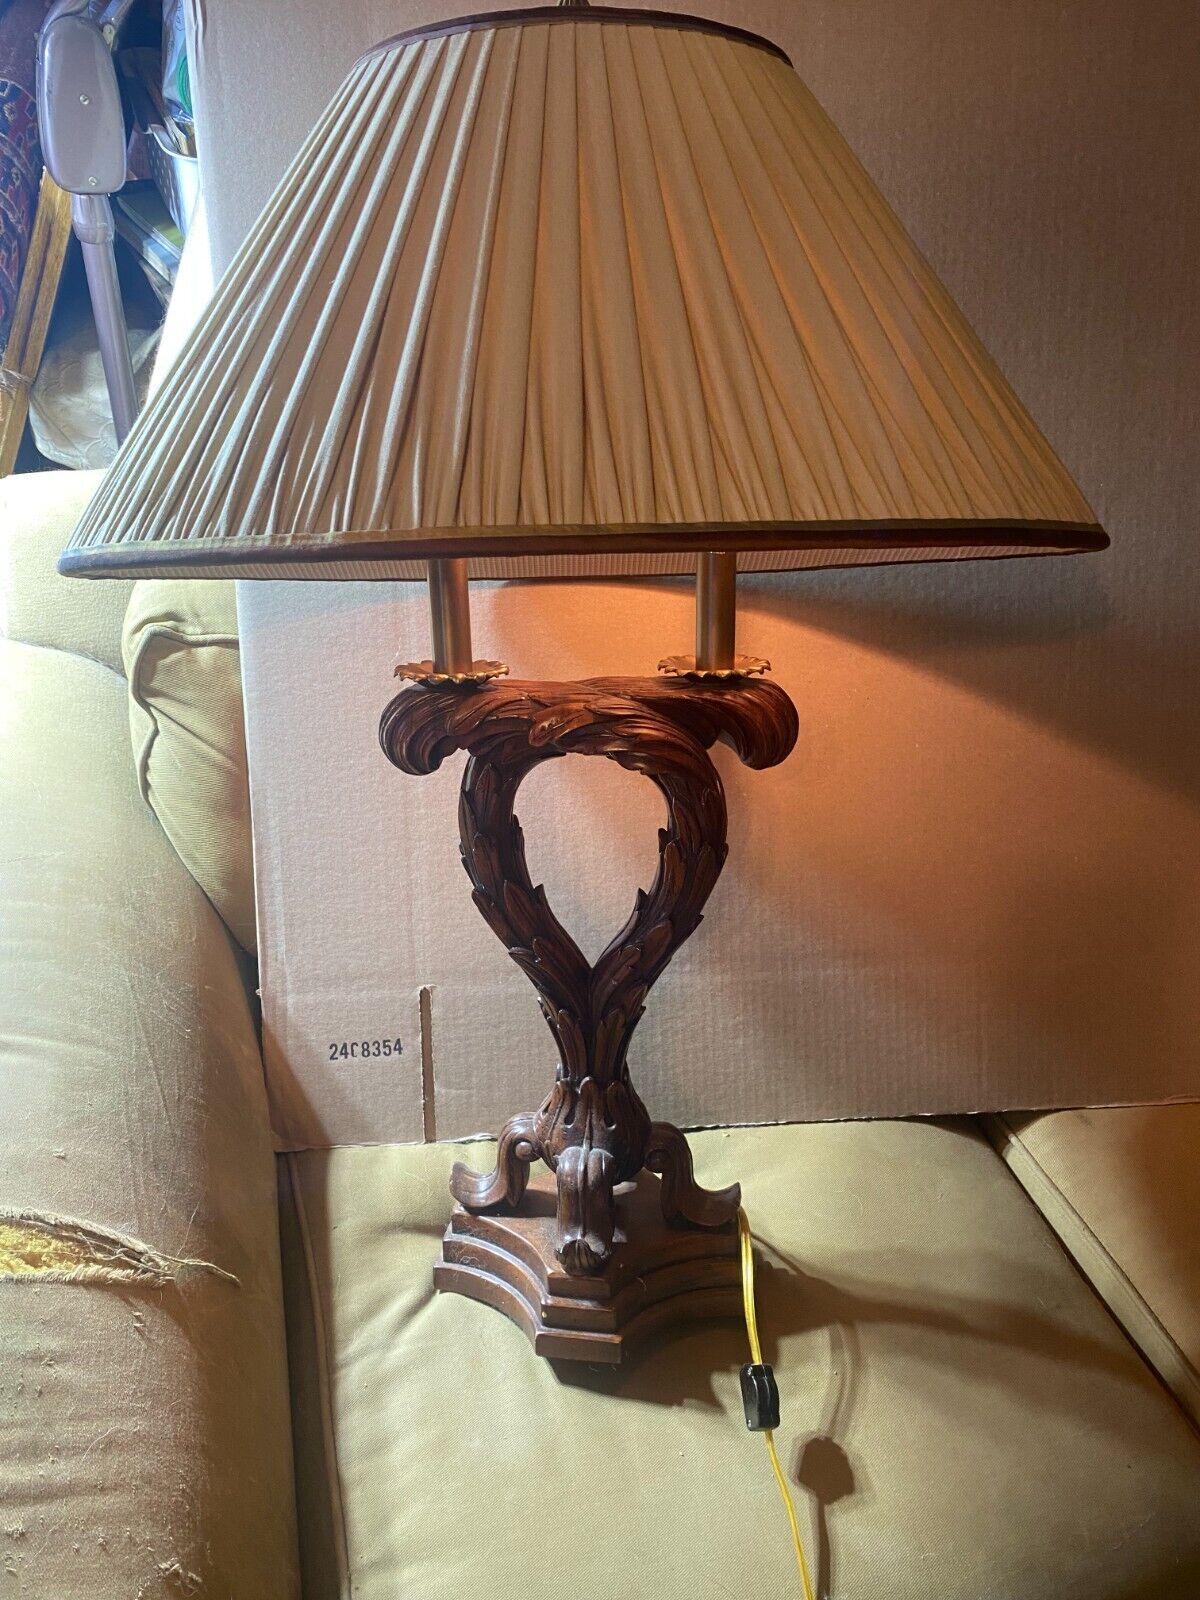 Theodore Alexander Table Lamp With Wood Base And Featuring Shade Within A Shade